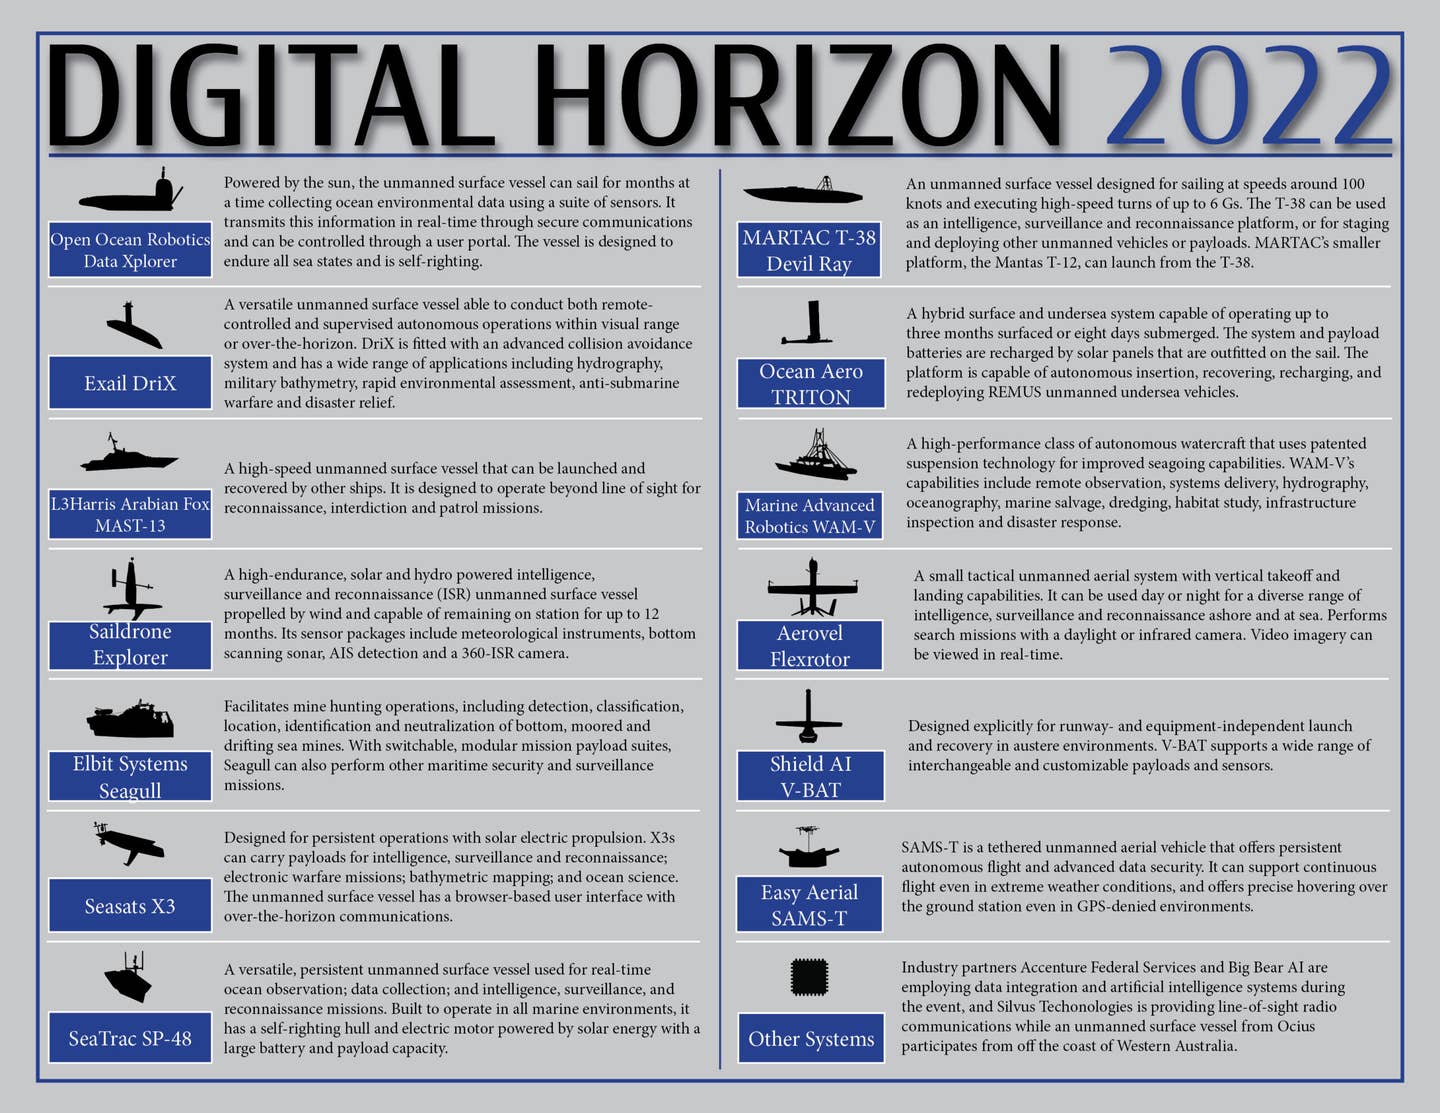 Graphic illustration depicting the unmanned systems that participated in exercise Digital Horizon 2022. <em>Credit: U.S. Army graphic by Sgt. Brandon Murphy</em>